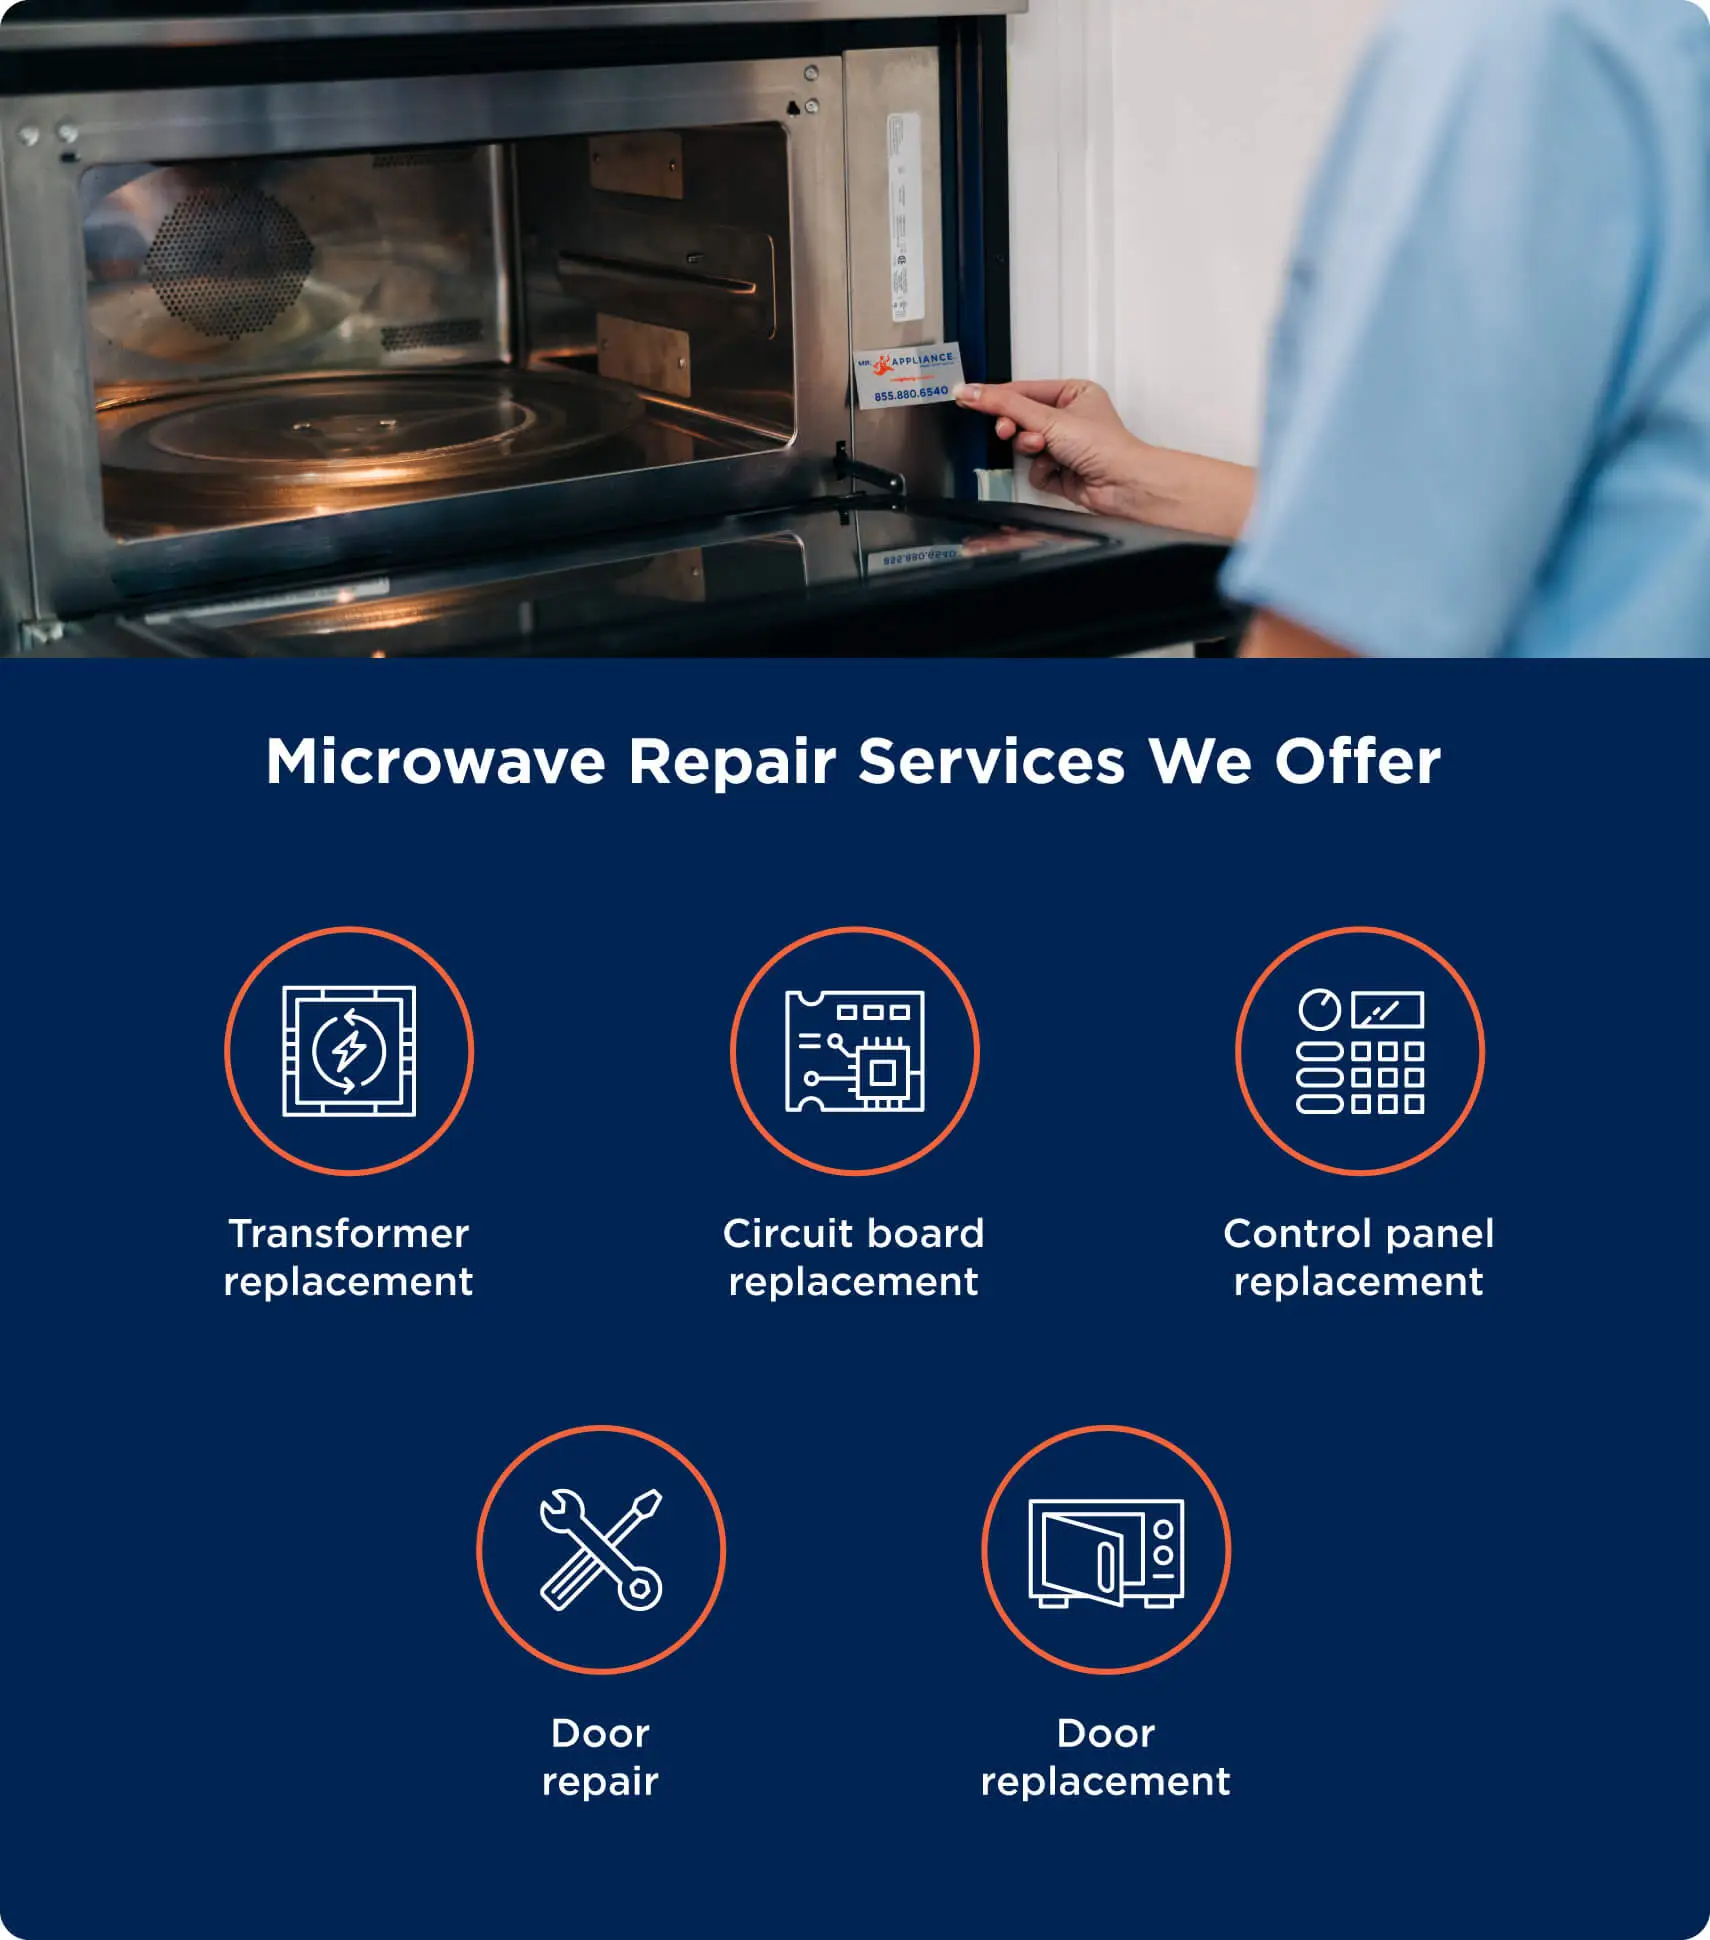 Mr. Appliance service professional fixing a microwave with a list of microwave repair services: transformer replacement, circuit board replacement, control panel replacement, door repair, and door replacement.